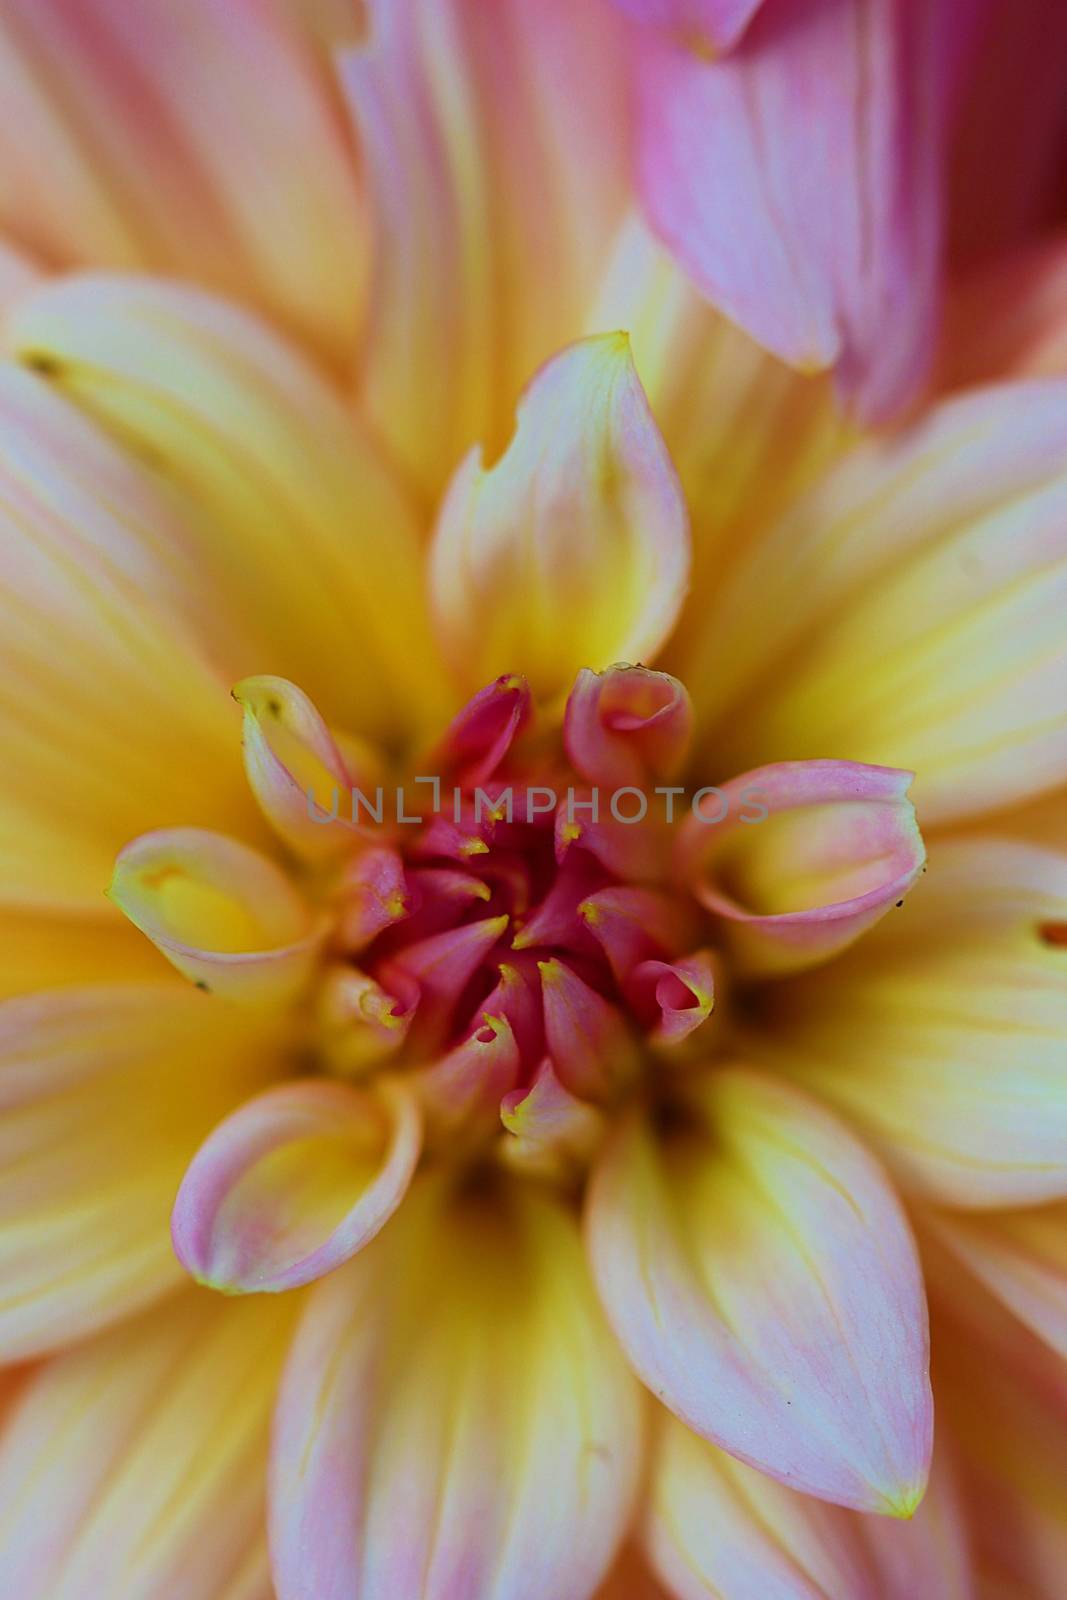 The Dahlia is a perennial flower found in tropical regions but can be used in temperate zones when stored over winter.